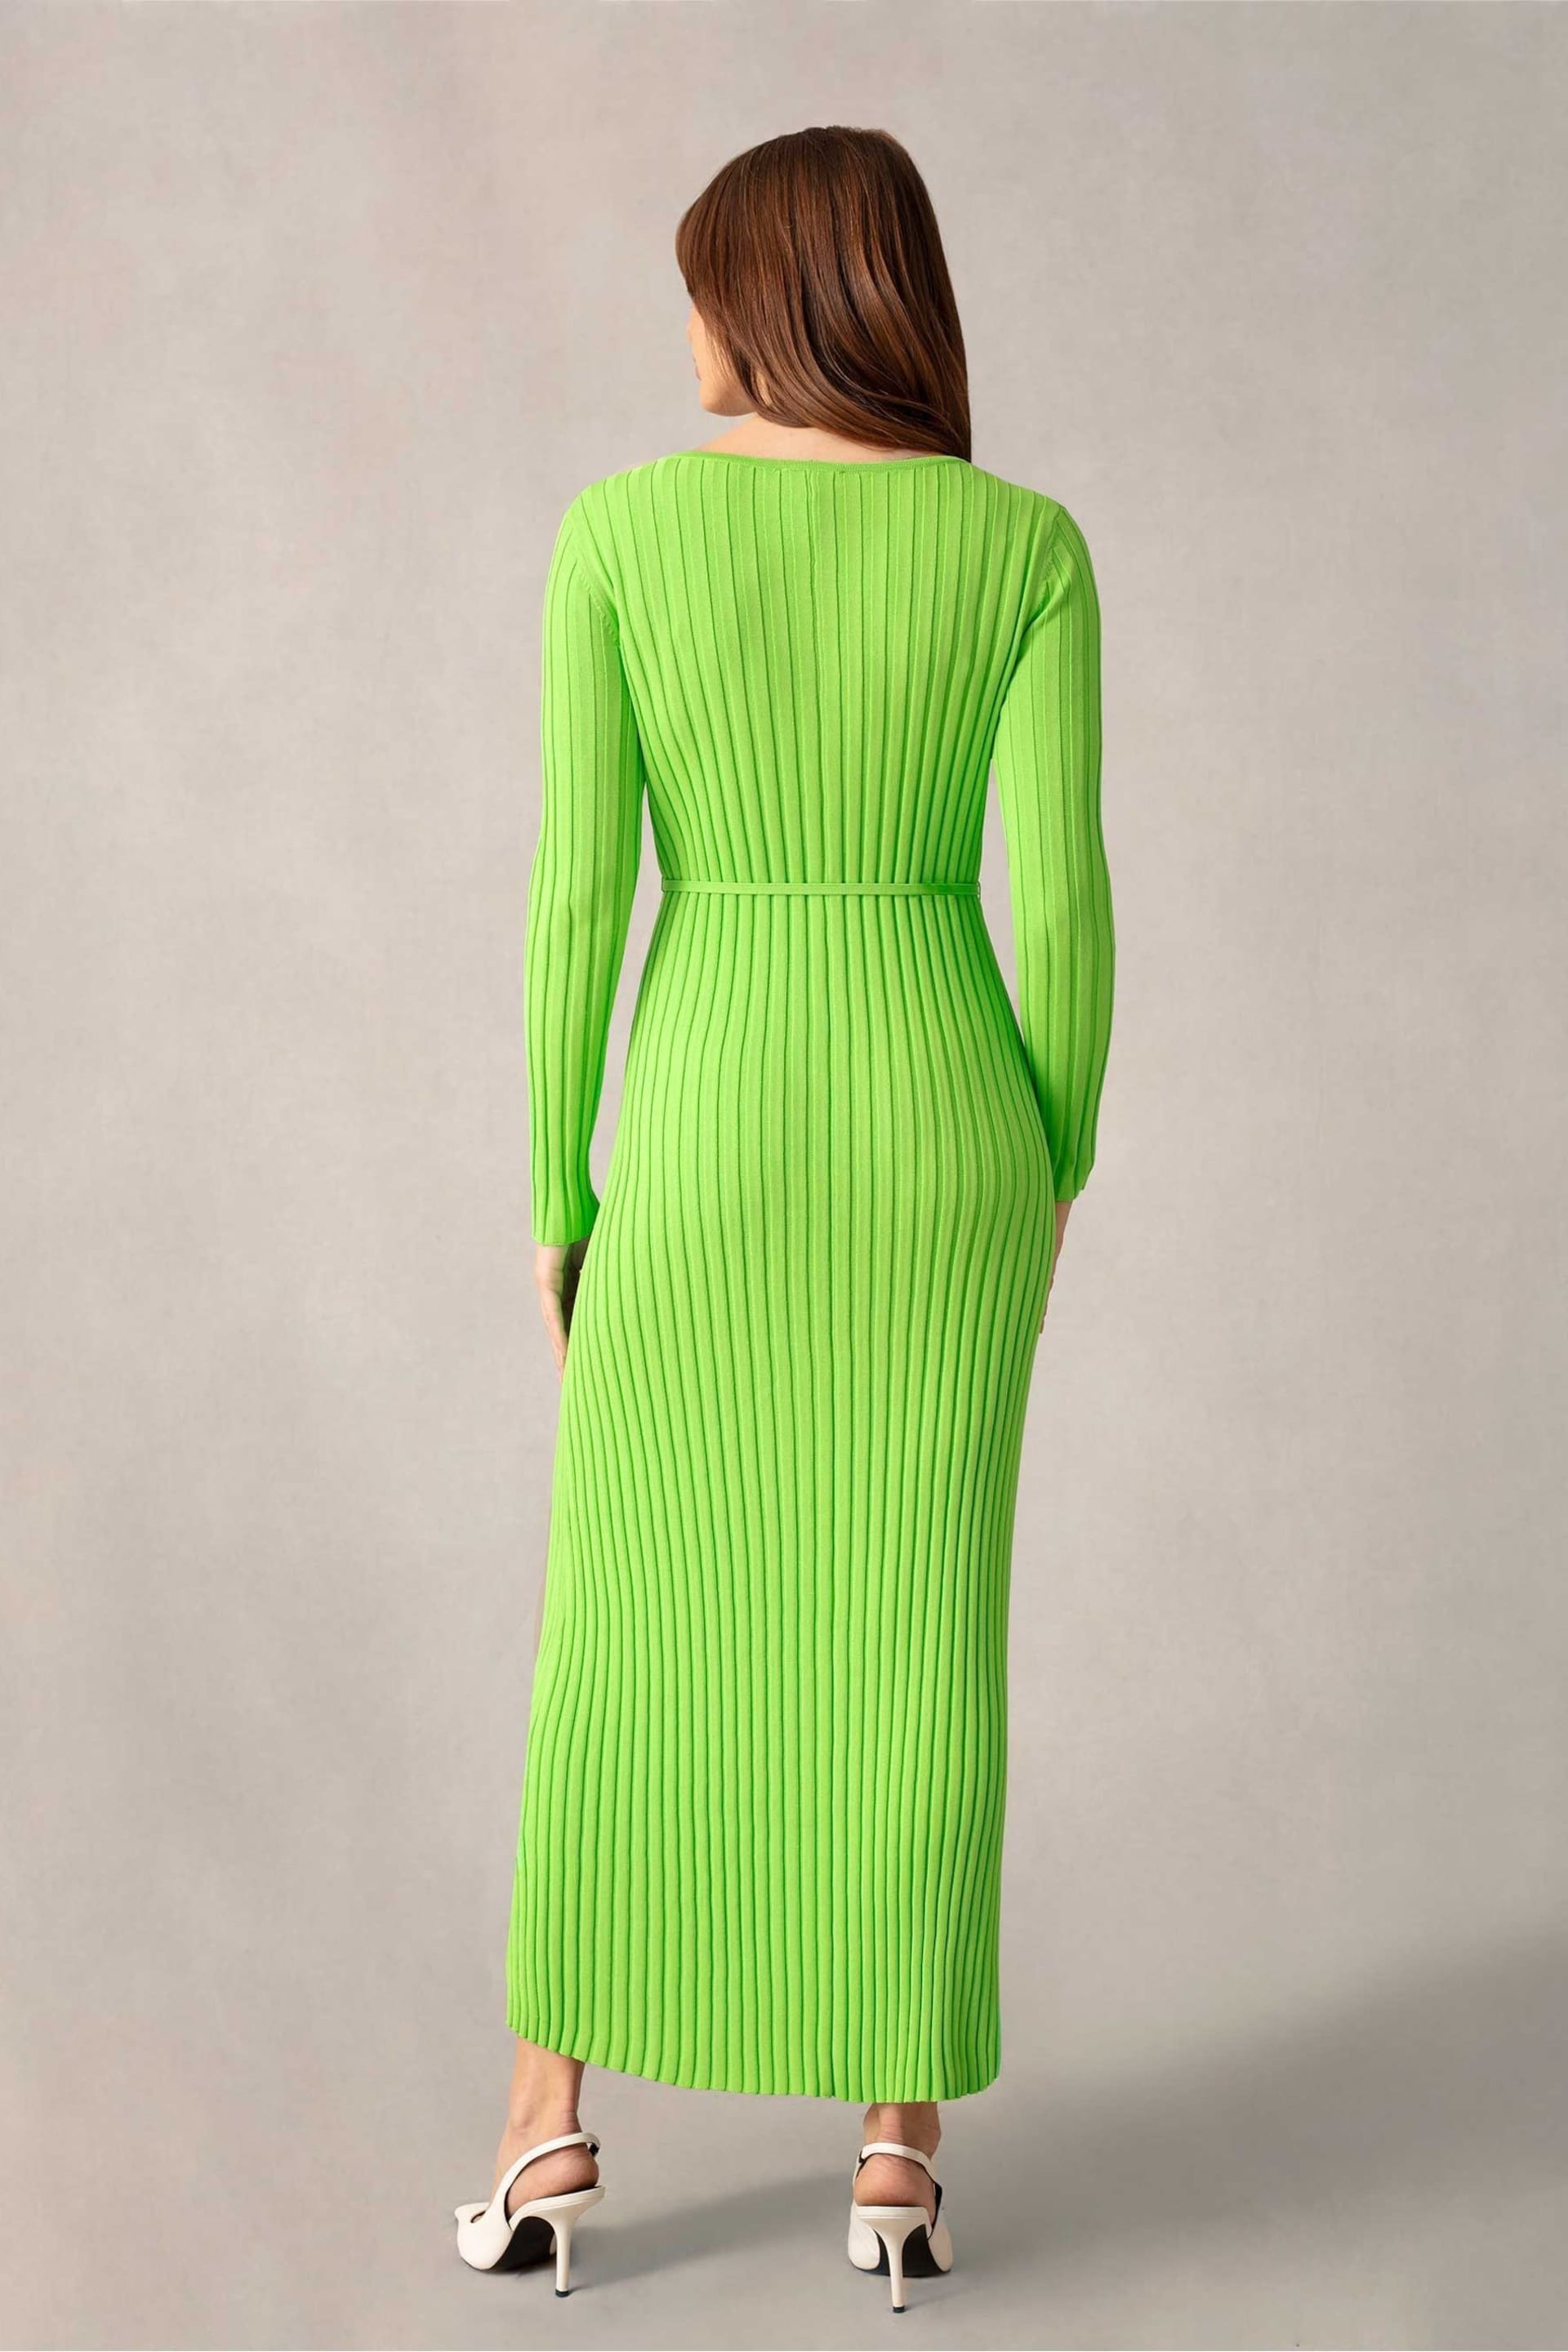 Ro&Zo Green Lime Wide Rib Knit V-Neck Dress - Image 2 of 6